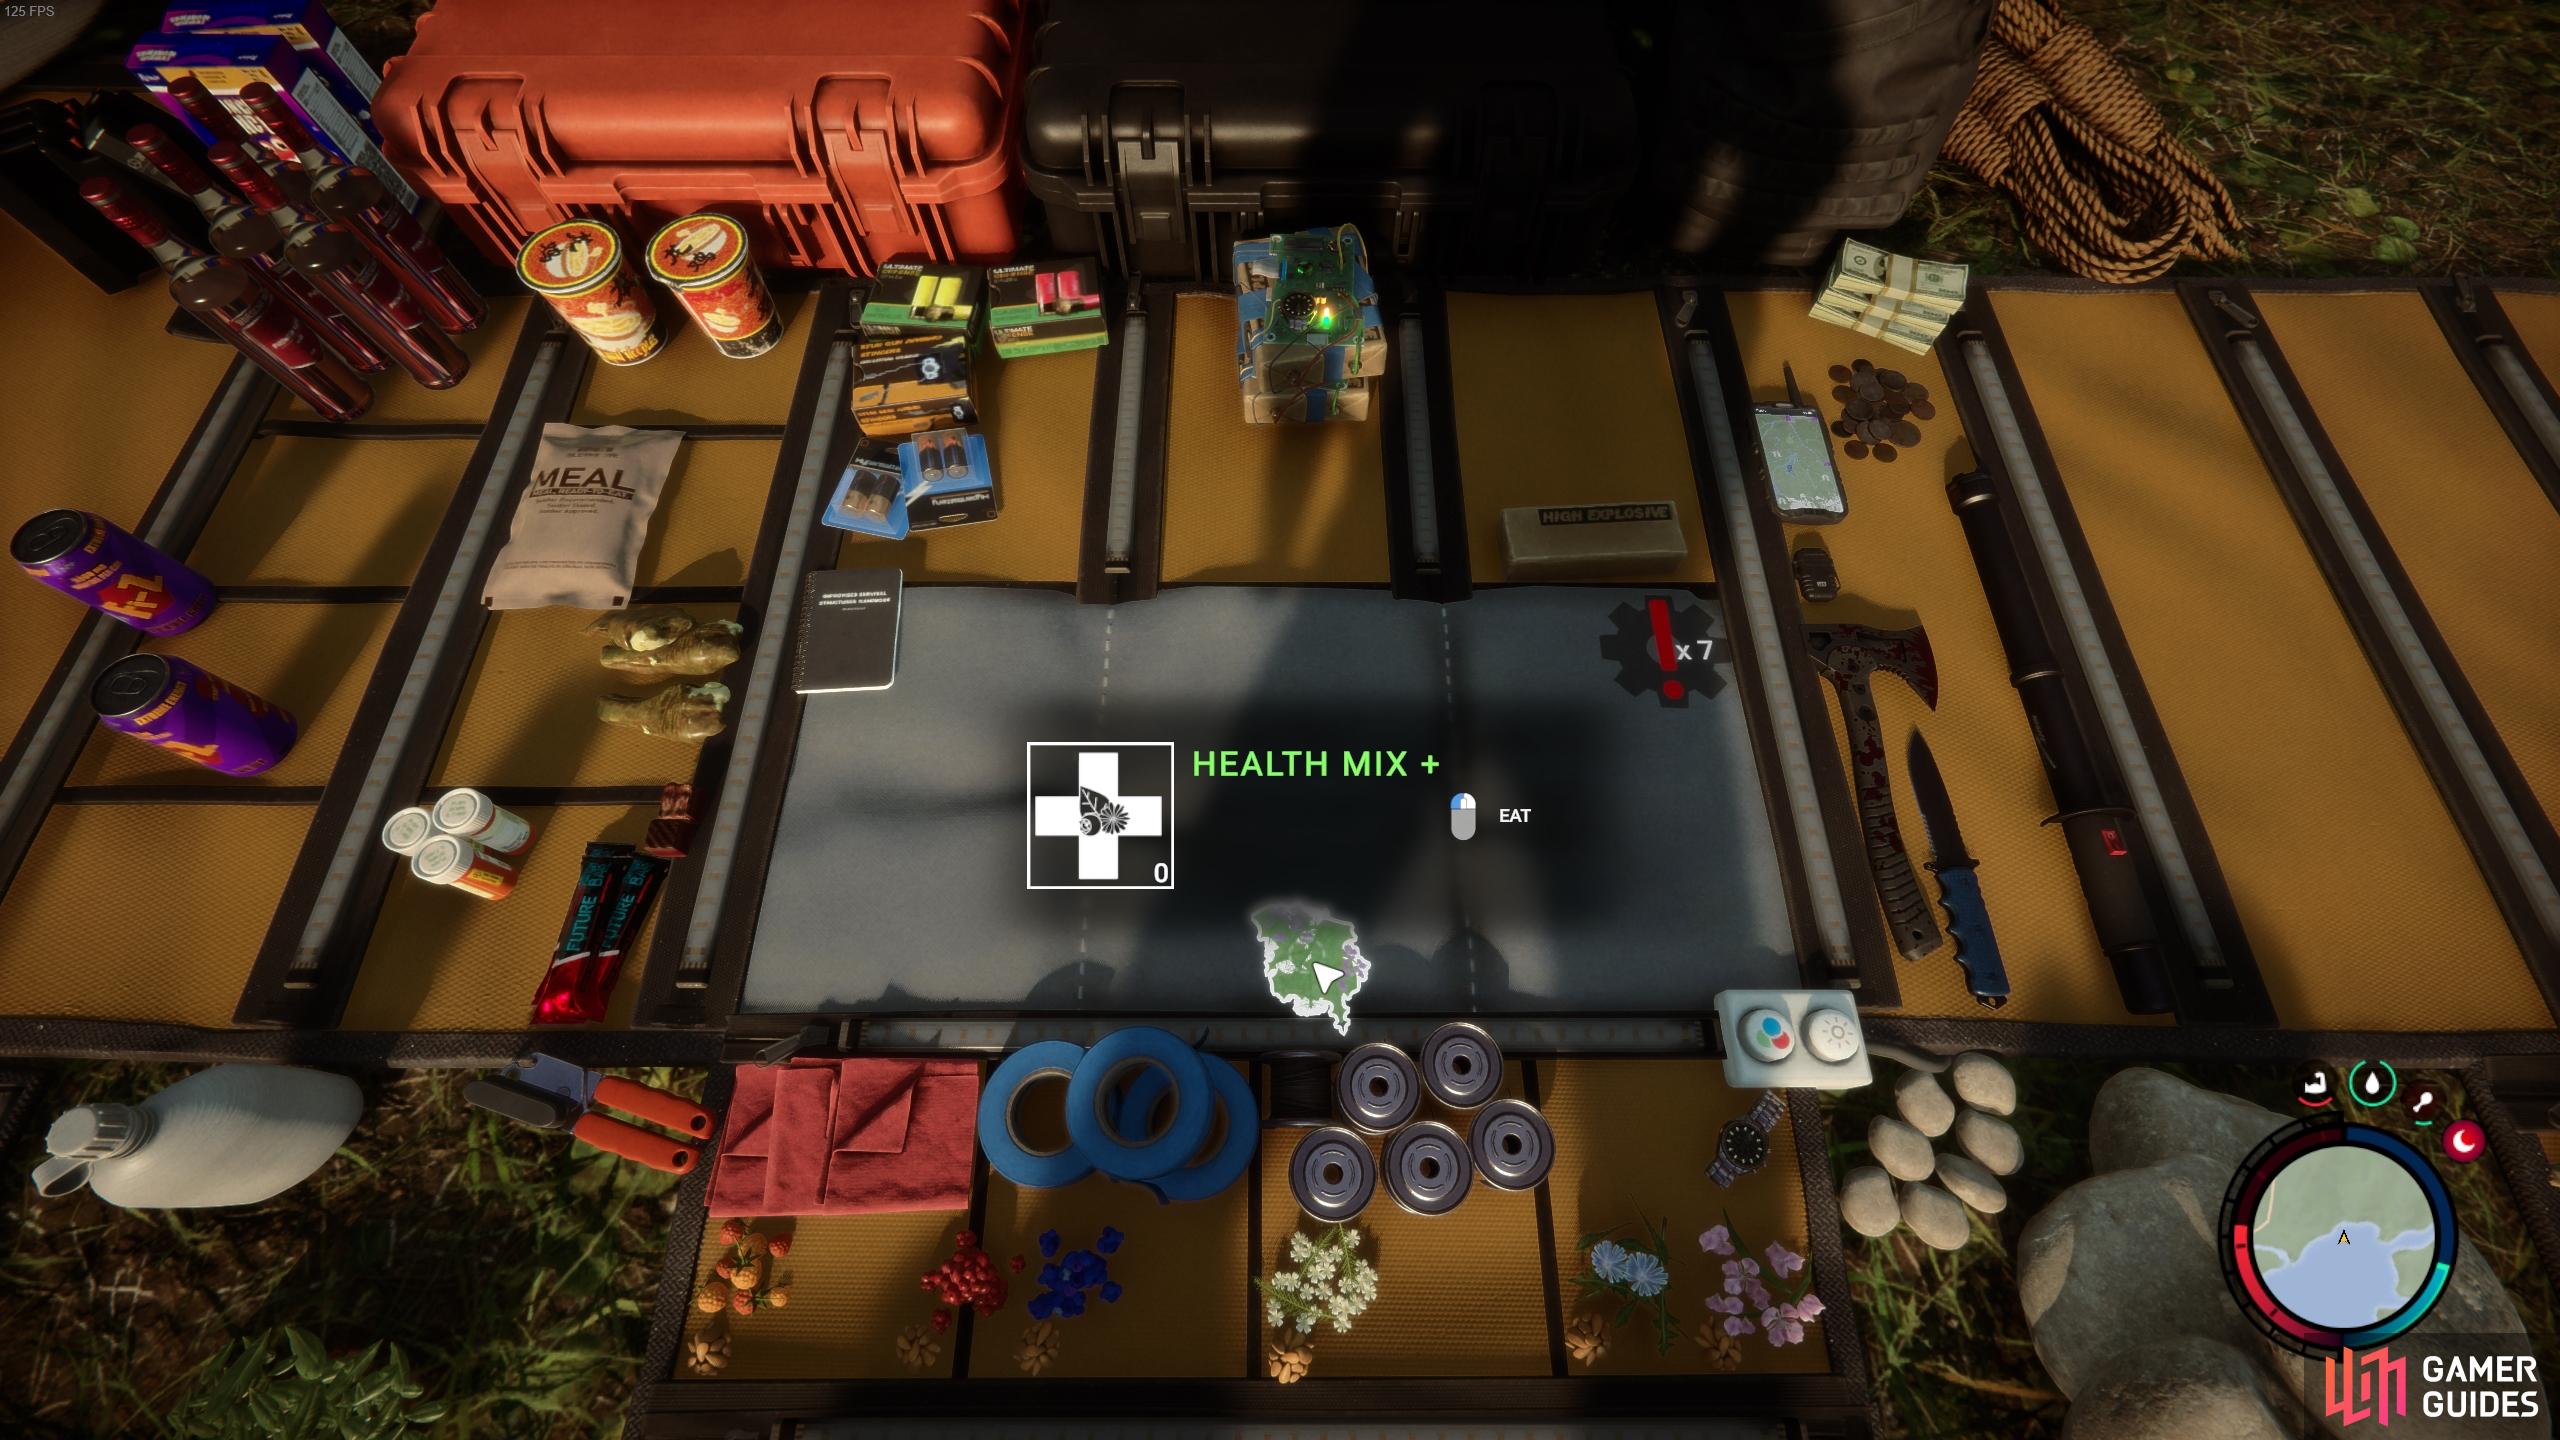 You can consume a Health Mix directly from your inventory, or add it to your Backpack for quick access during a fight.